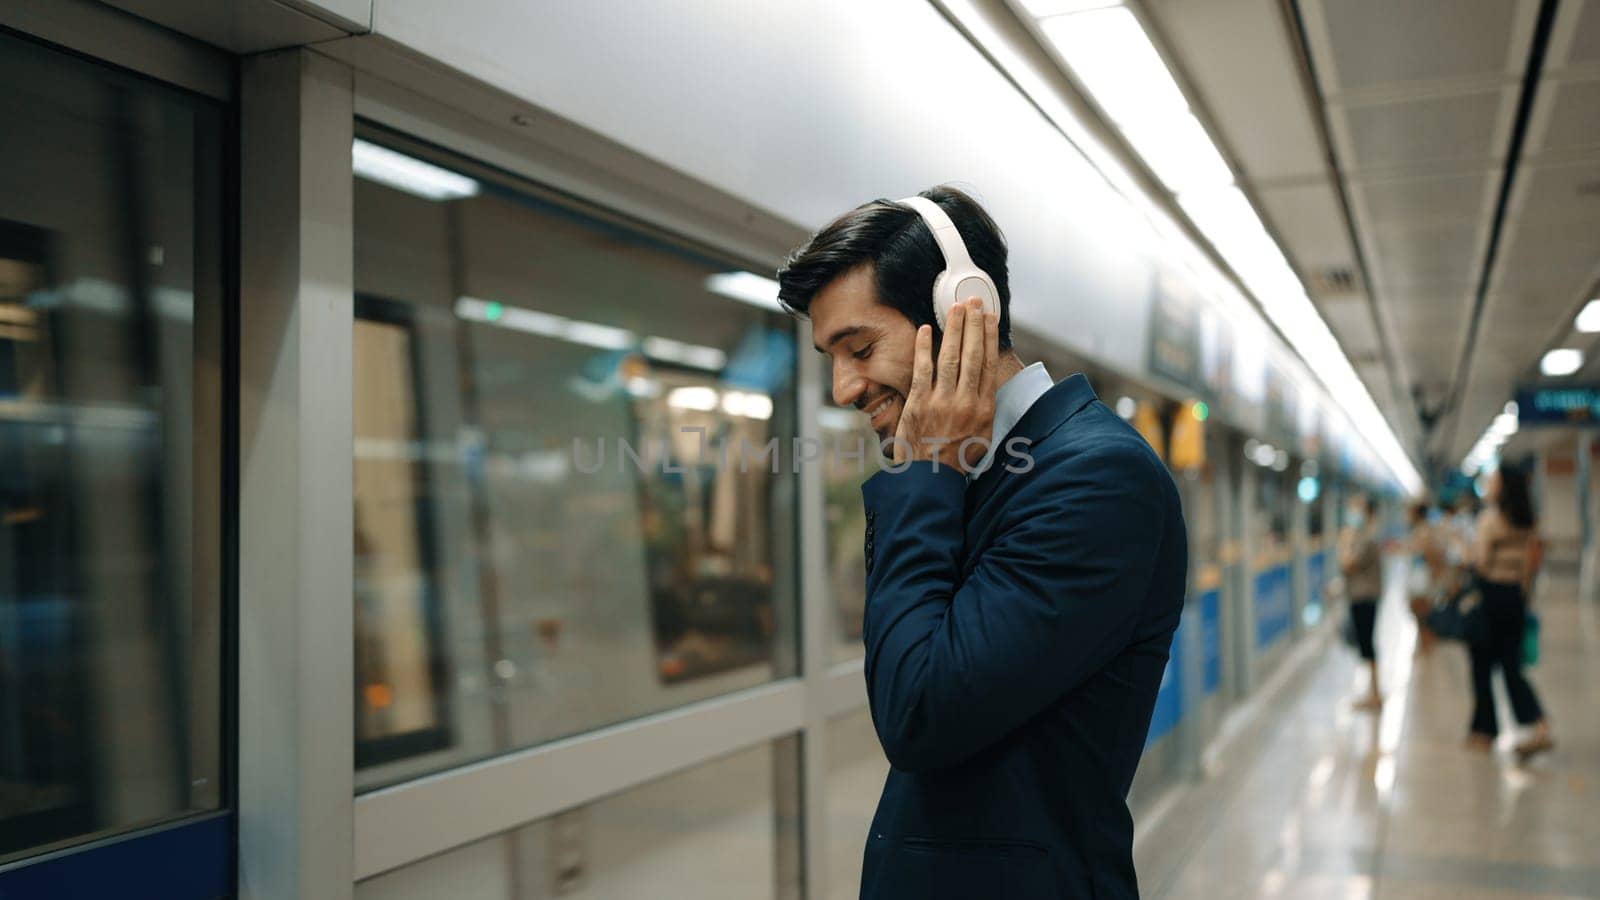 Manager wearing headphone at train station while holding mobile phone. Exultant. by biancoblue